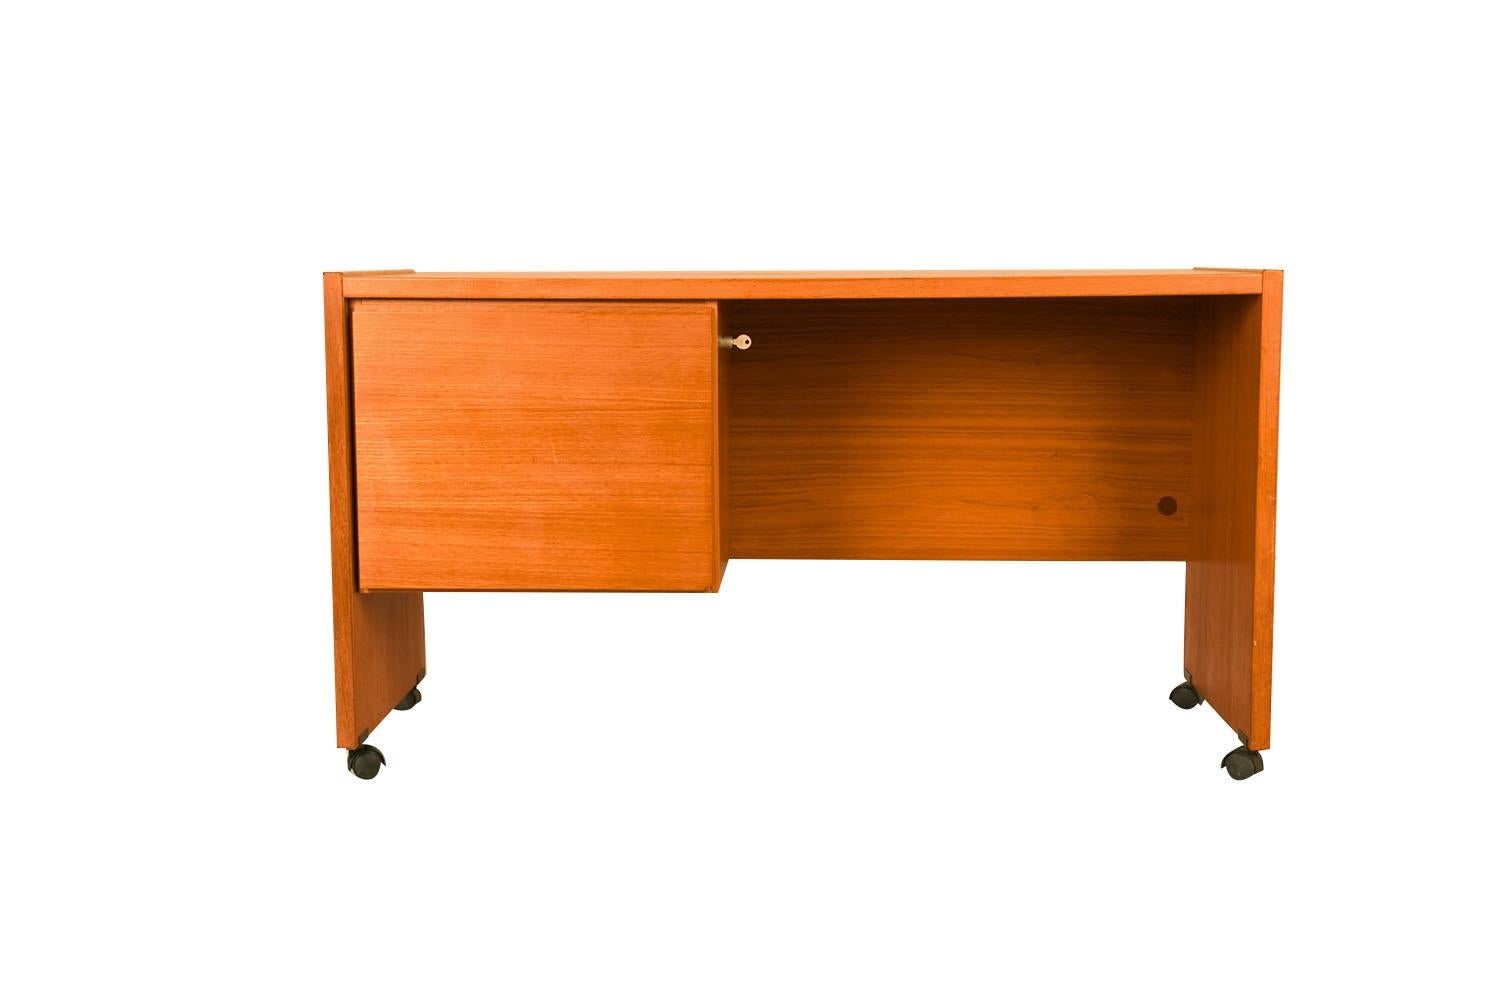 A beautiful Danish modern mid century teak desk, crafted by Nordisk Andels-Eksport in Denmark. Features a rectangular top above one generously-sized filing drawer to the left, key is present, while the right side is open, with a fully finished back.